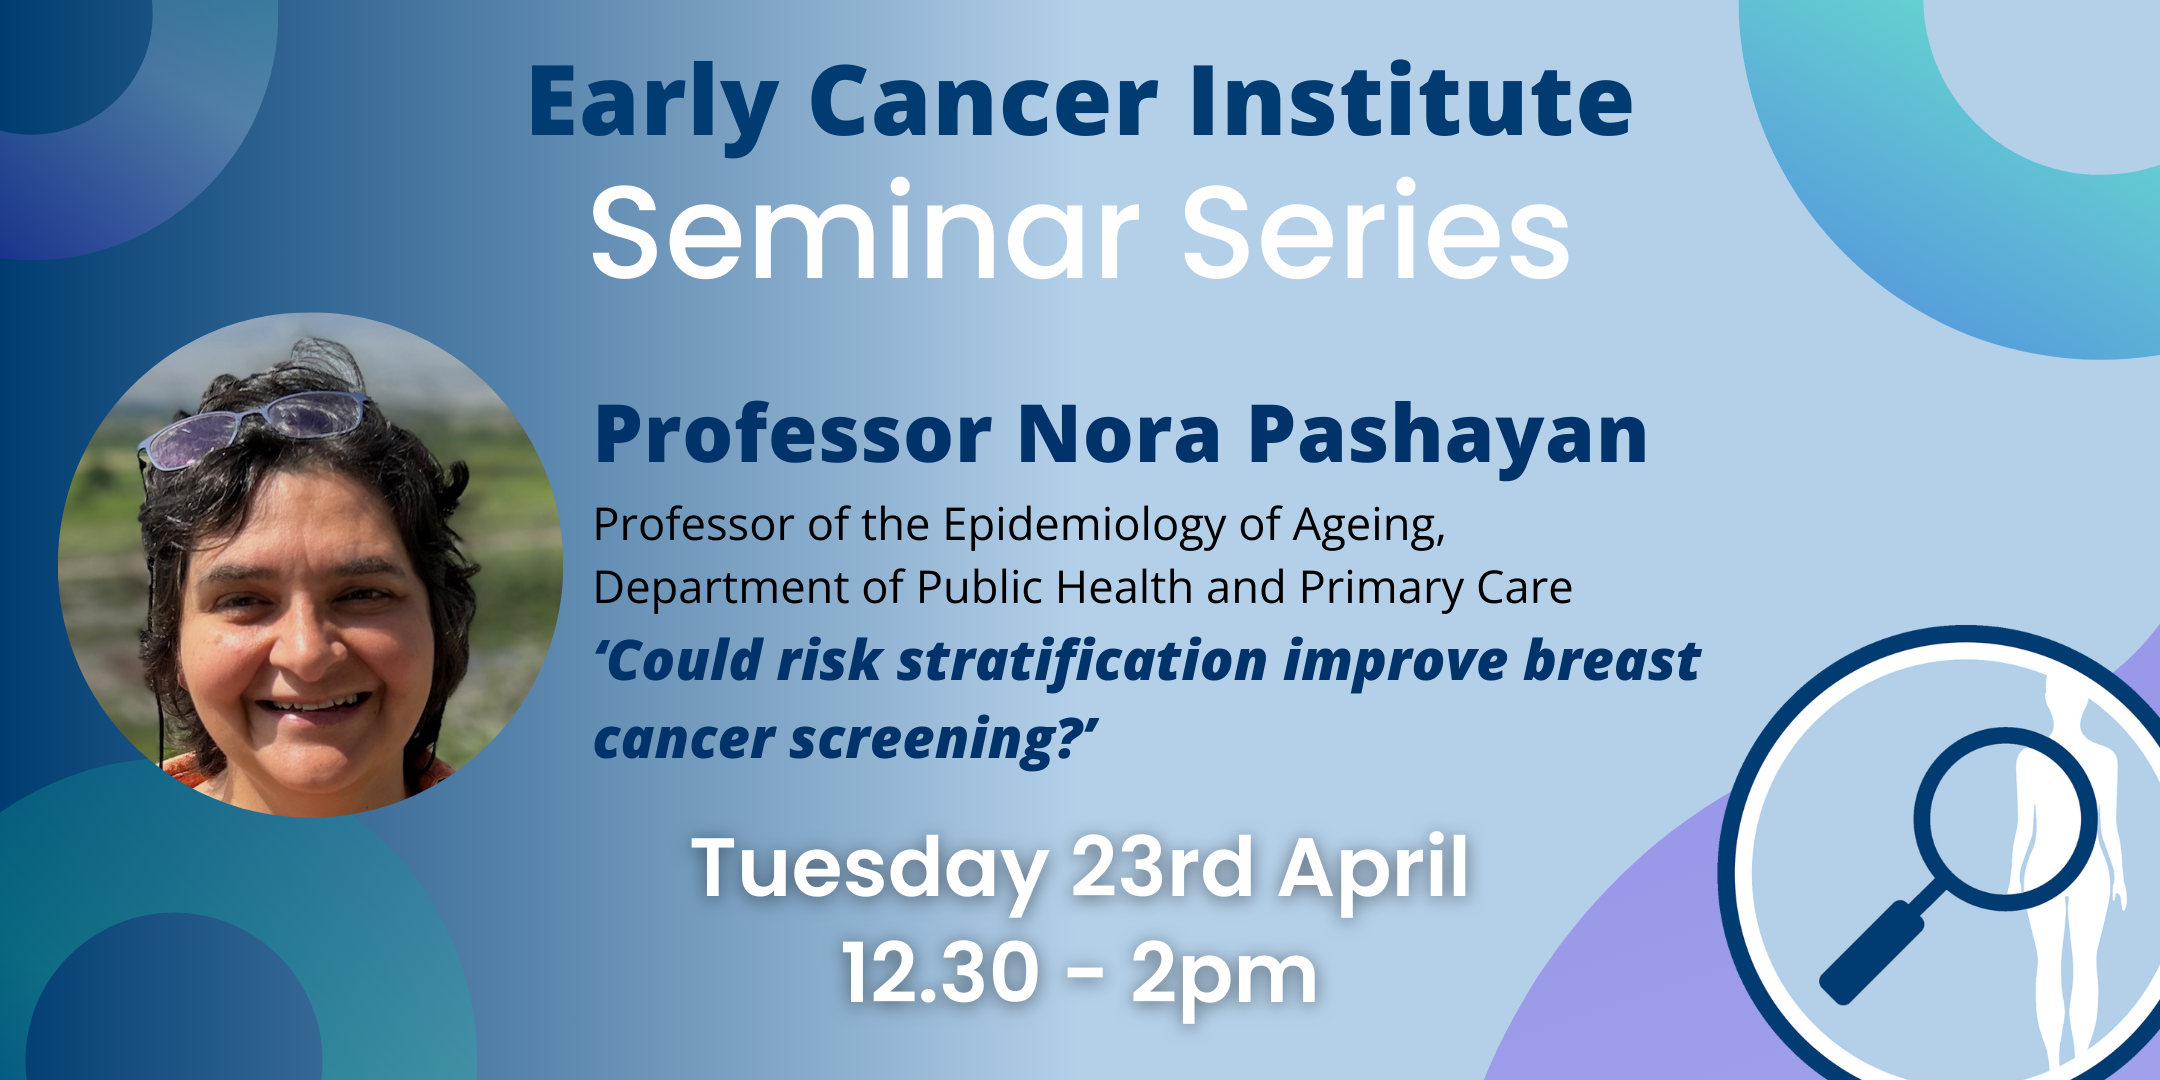 Early Cancer Institute Seminar Series: Nora Pashayan